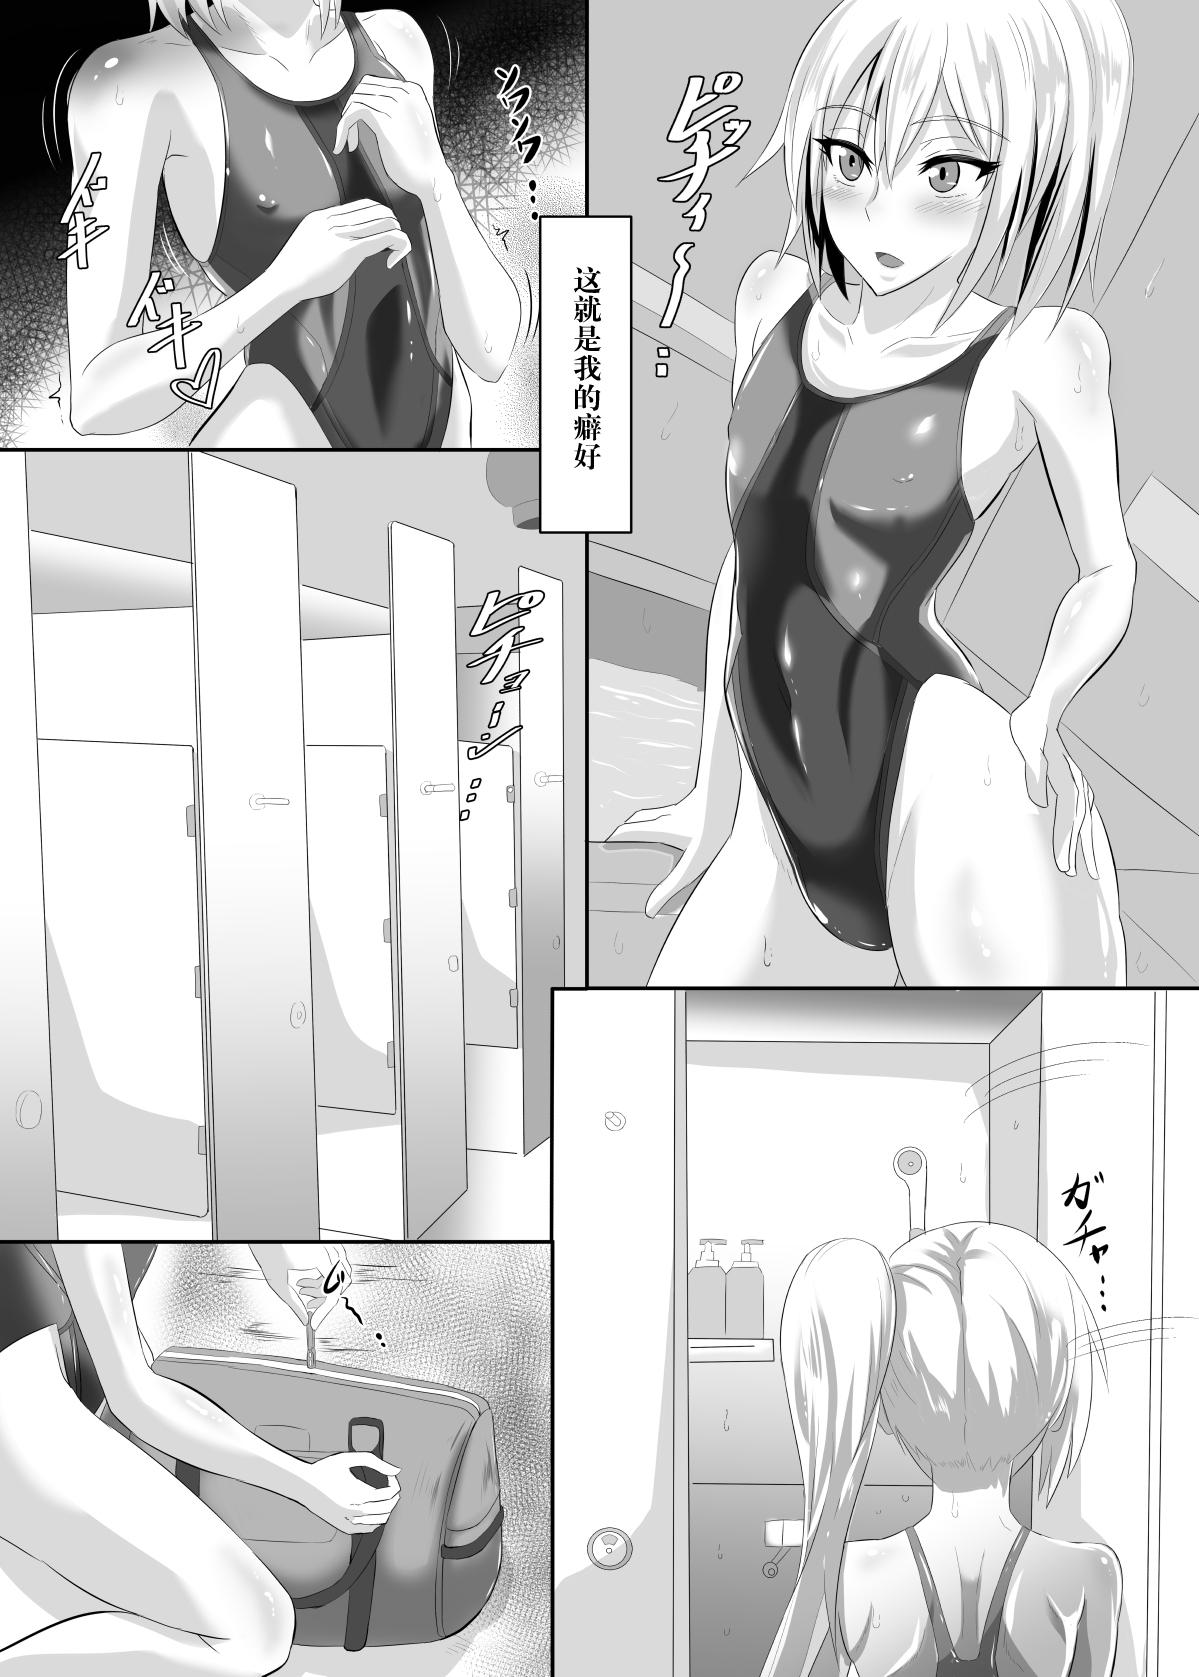 Blows Gehenna 6 - Fate grand order Small Tits - Page 11